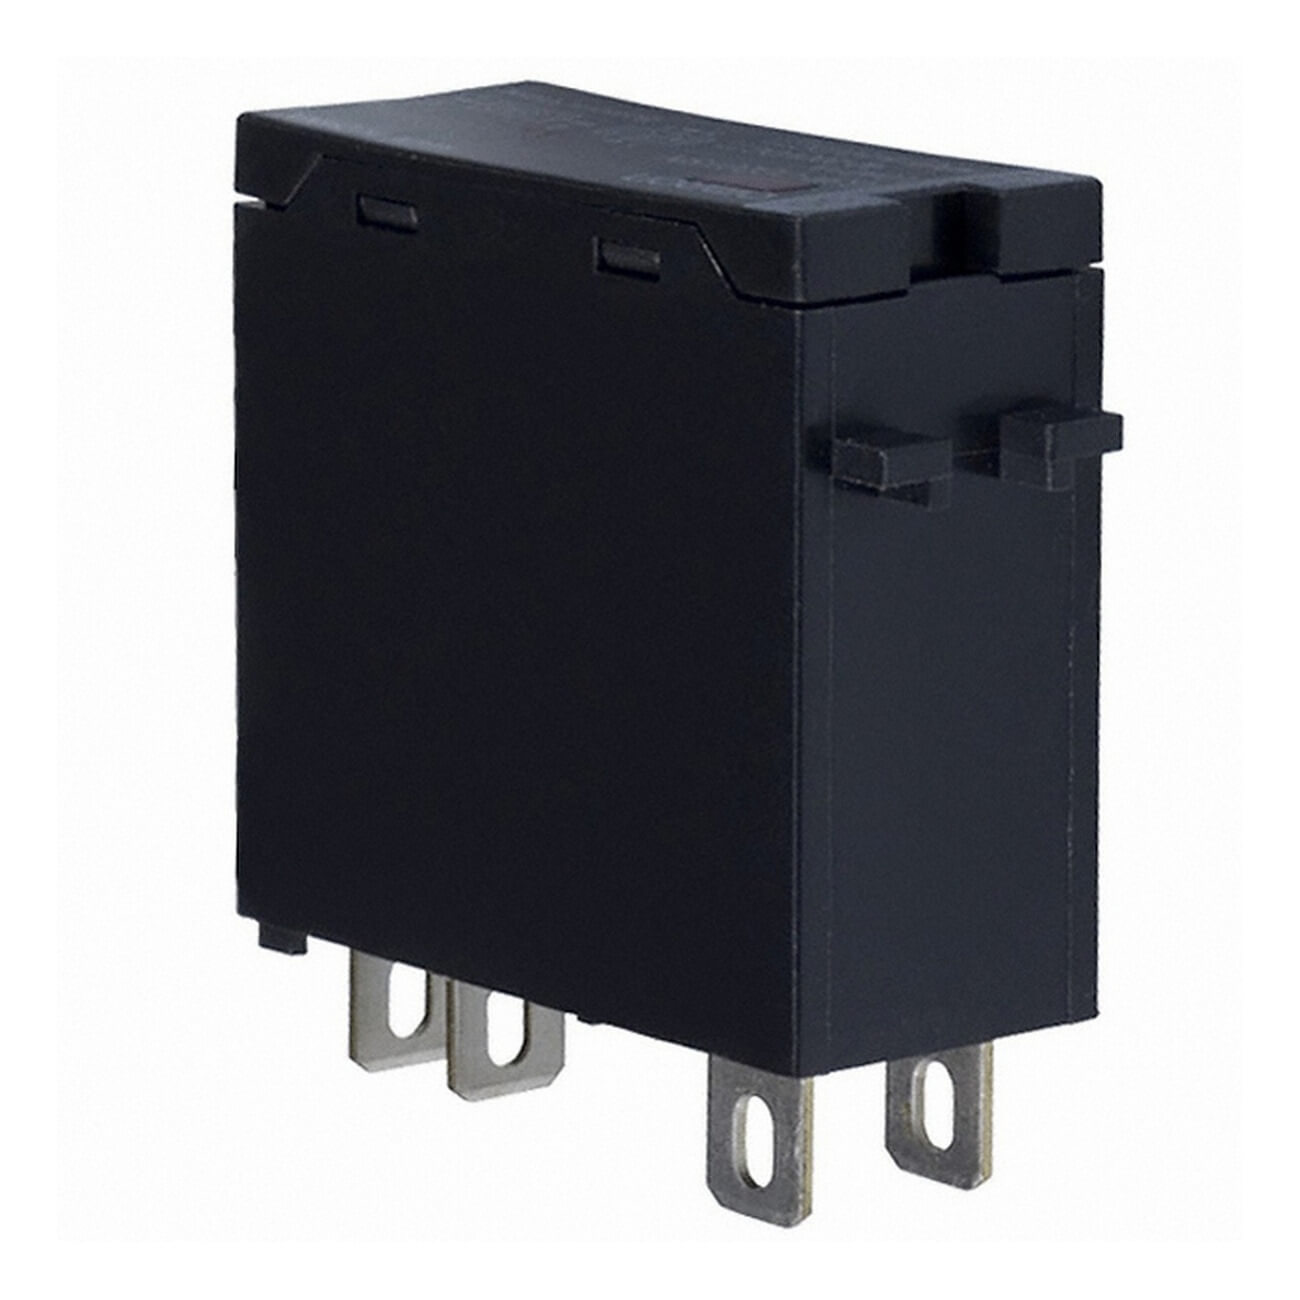 NEW* #273377 Details about   OMRON G3R-ODX025N,SOLID STATE RELAY, 